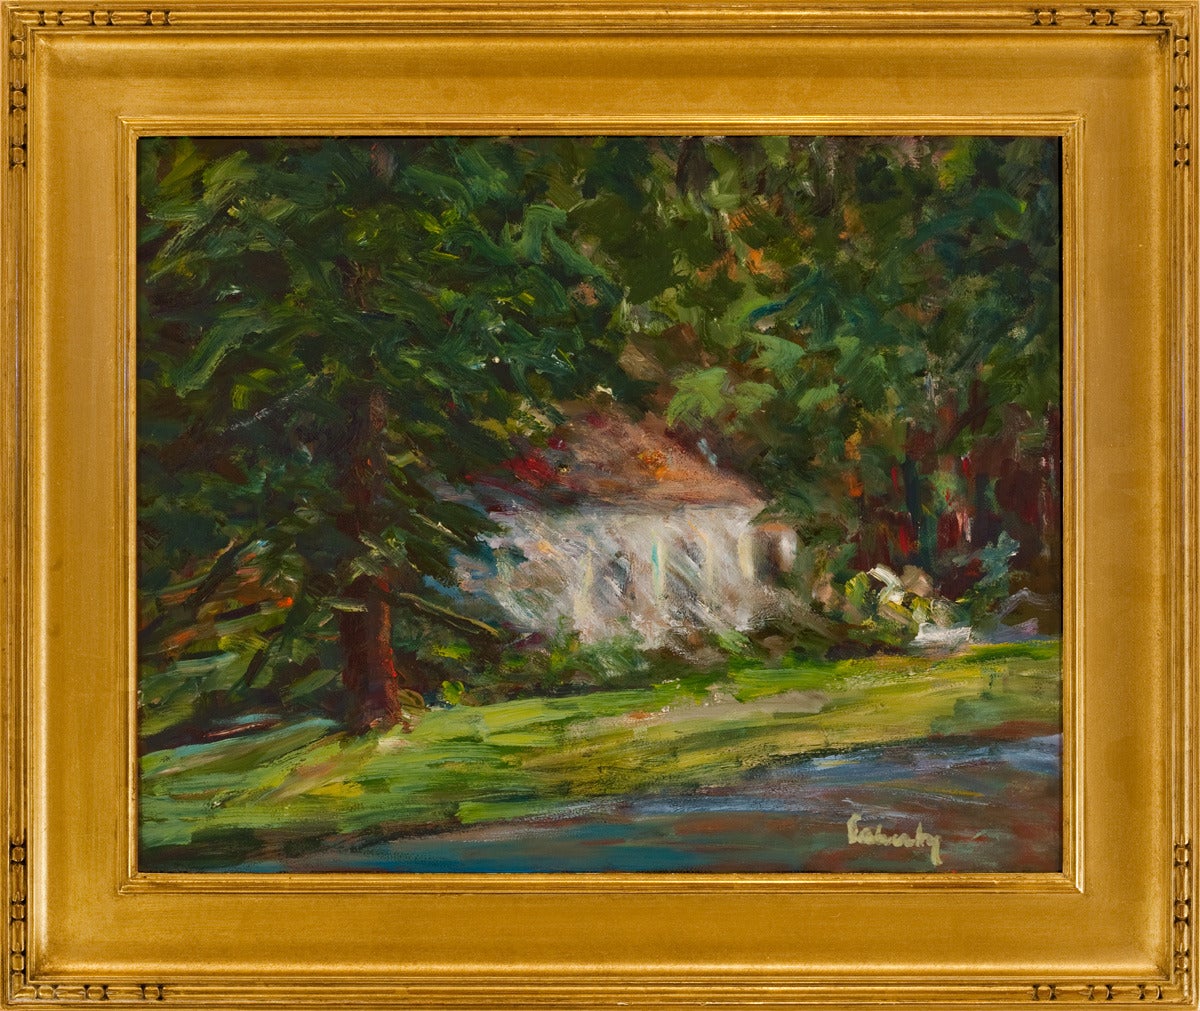 Evelyn Faherty Landscape Painting - "Solebury Summer"